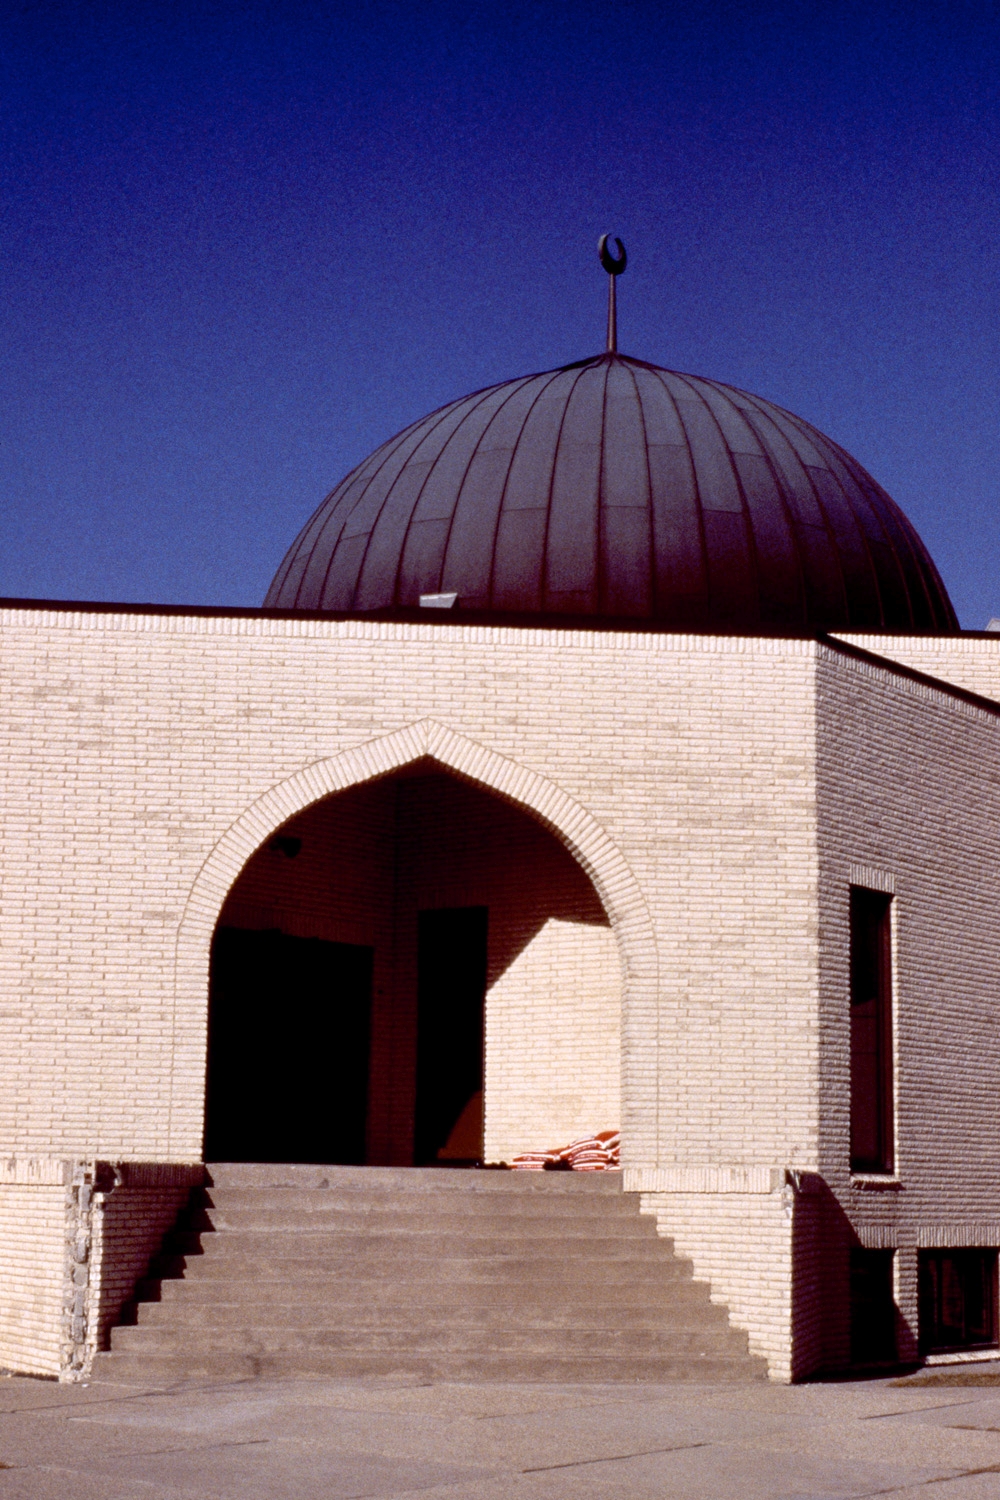 Exterior view of an entrance, with dome above